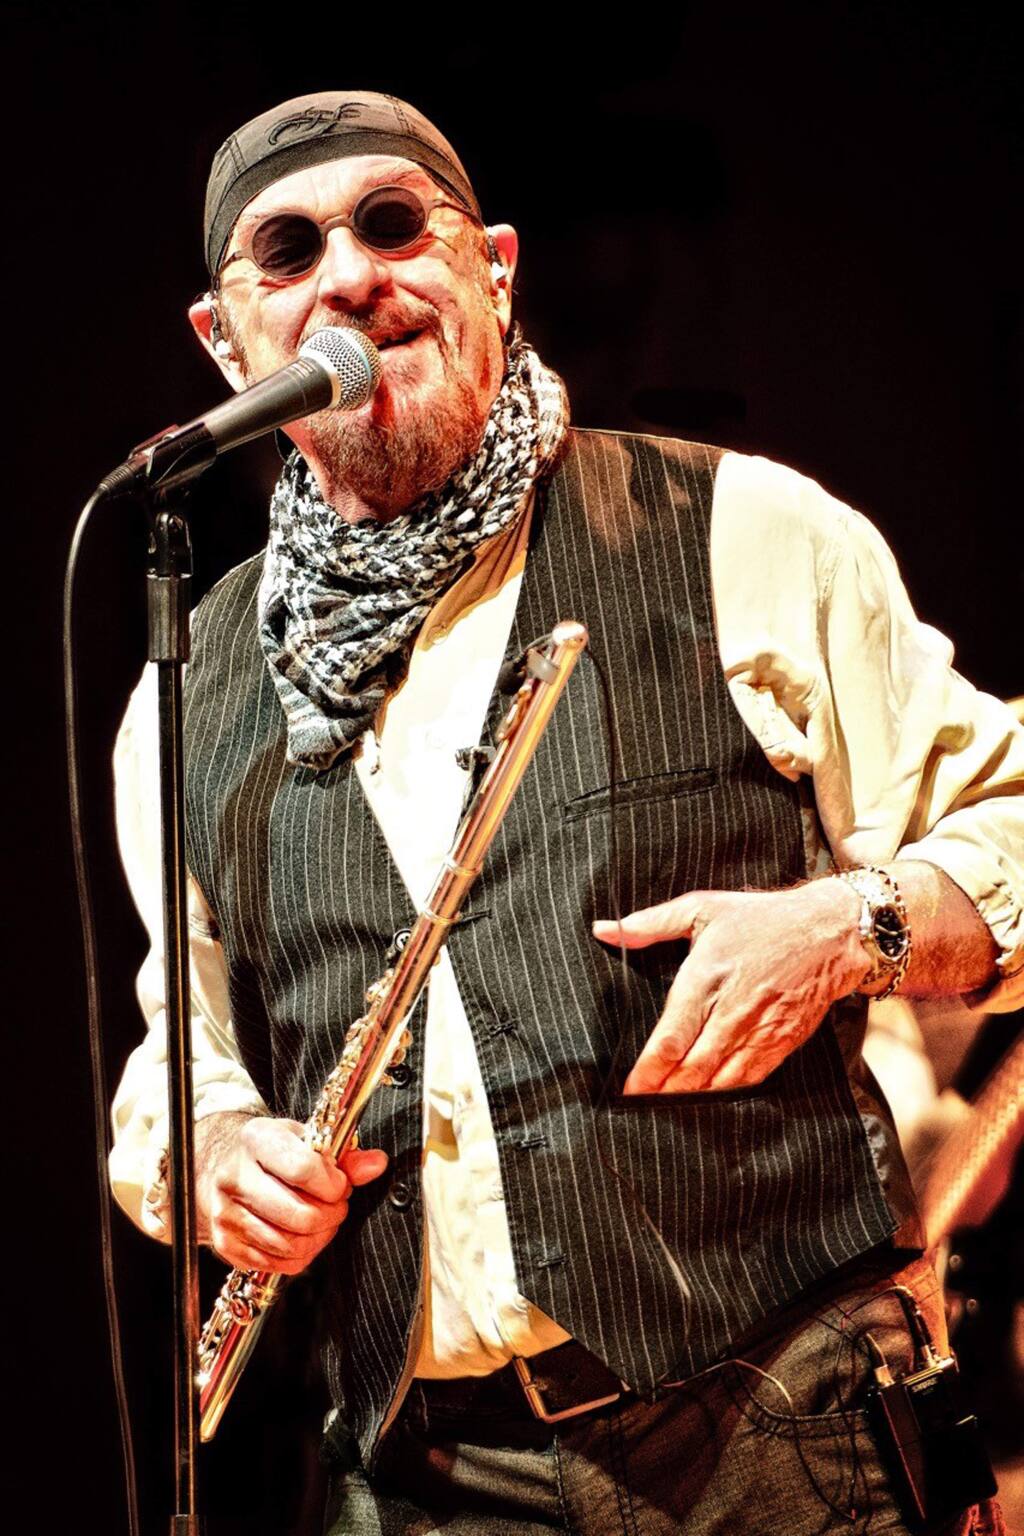 Jethro Tull Tickets - Jethro Tull Concert Tickets and Tour Dates